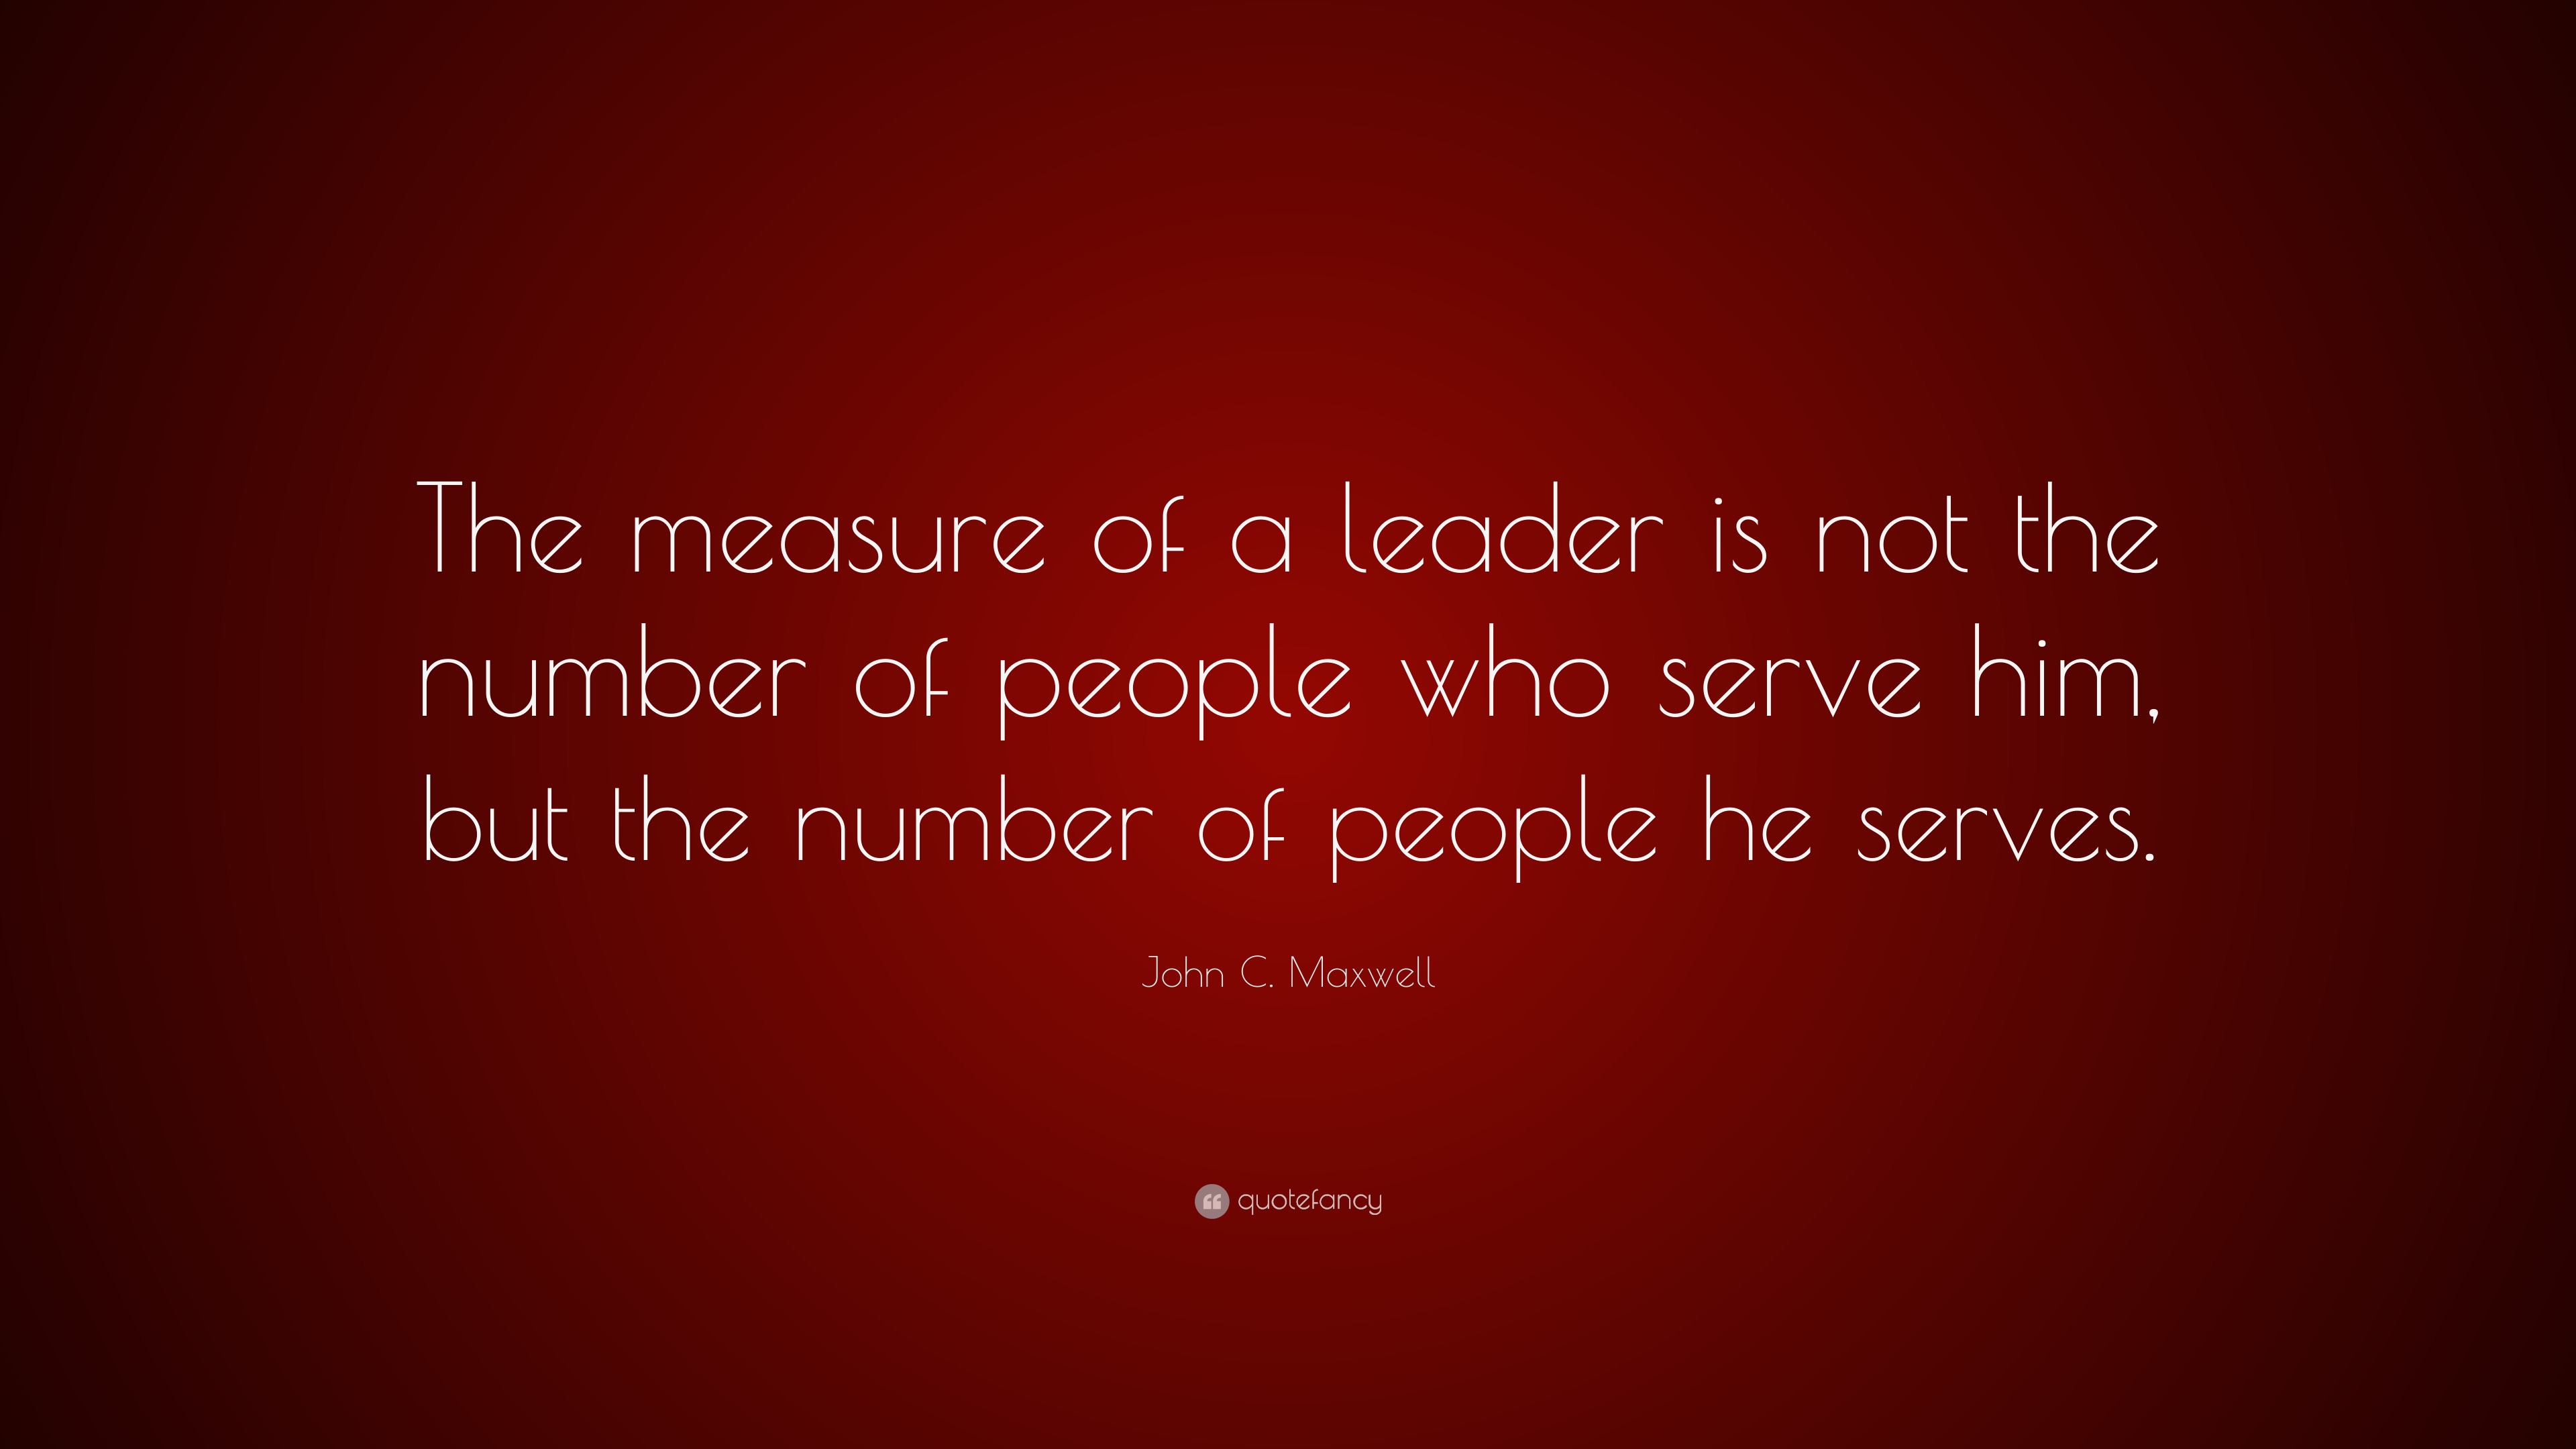 John C. Maxwell Quote: “The measure of a leader is not the number of ...